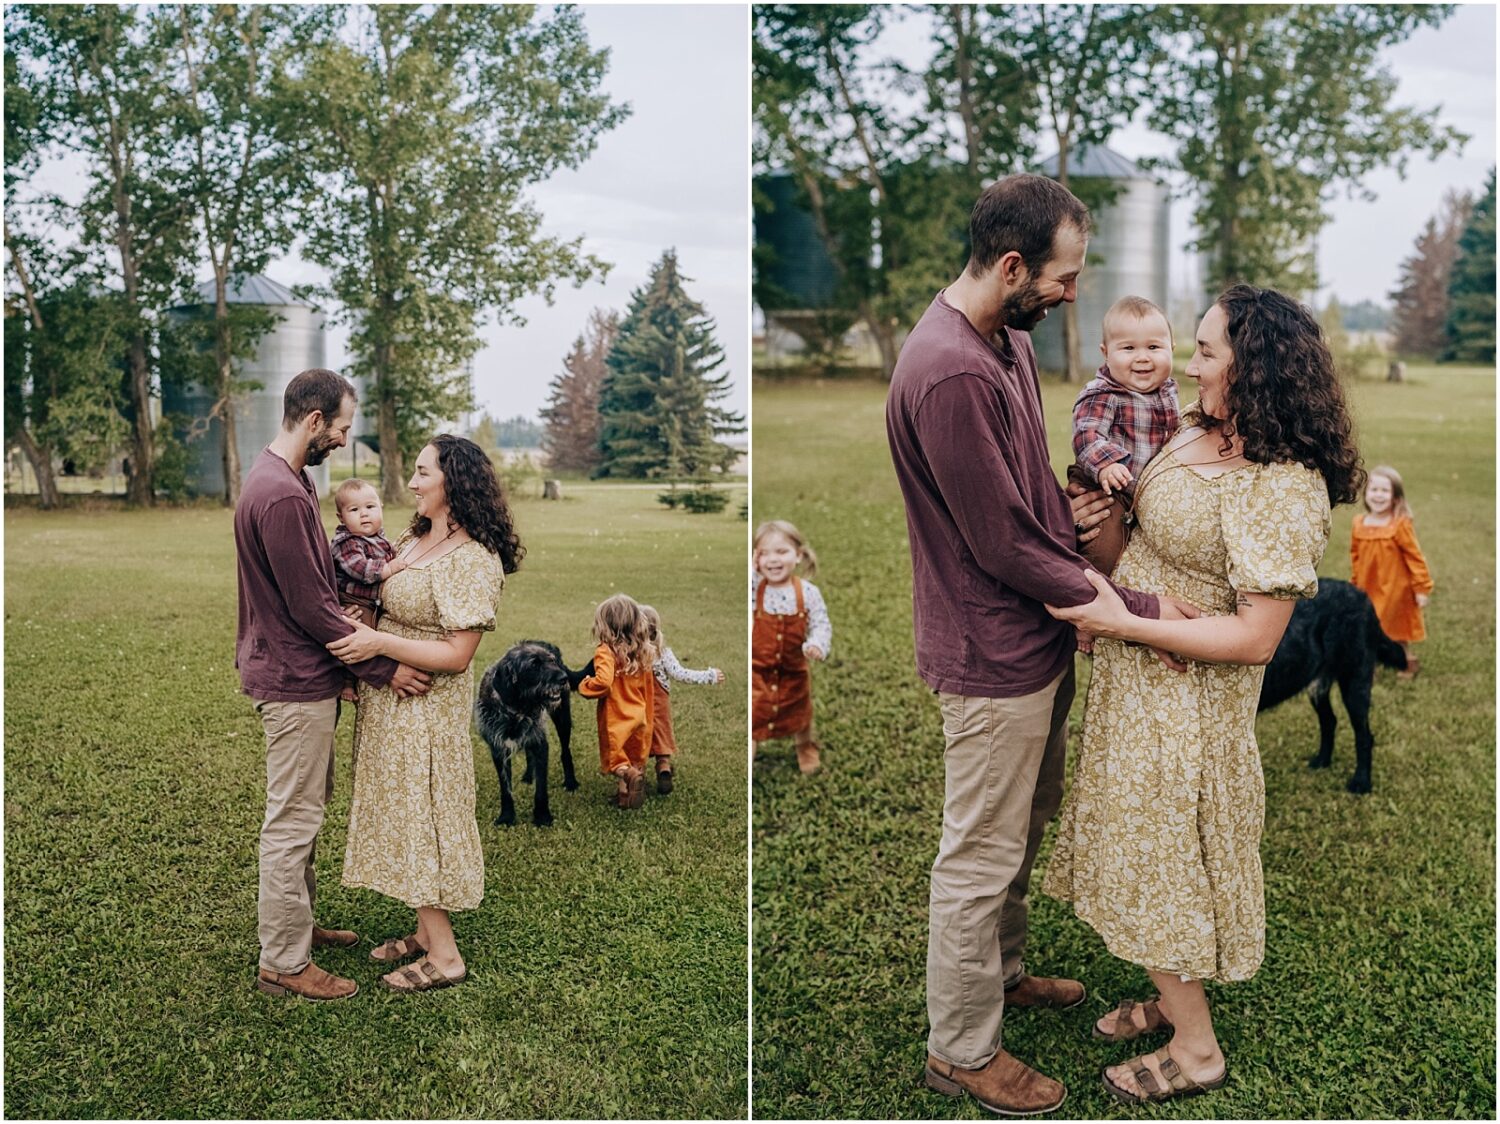 Family in Edmonton playing with eachother during a photoshoot